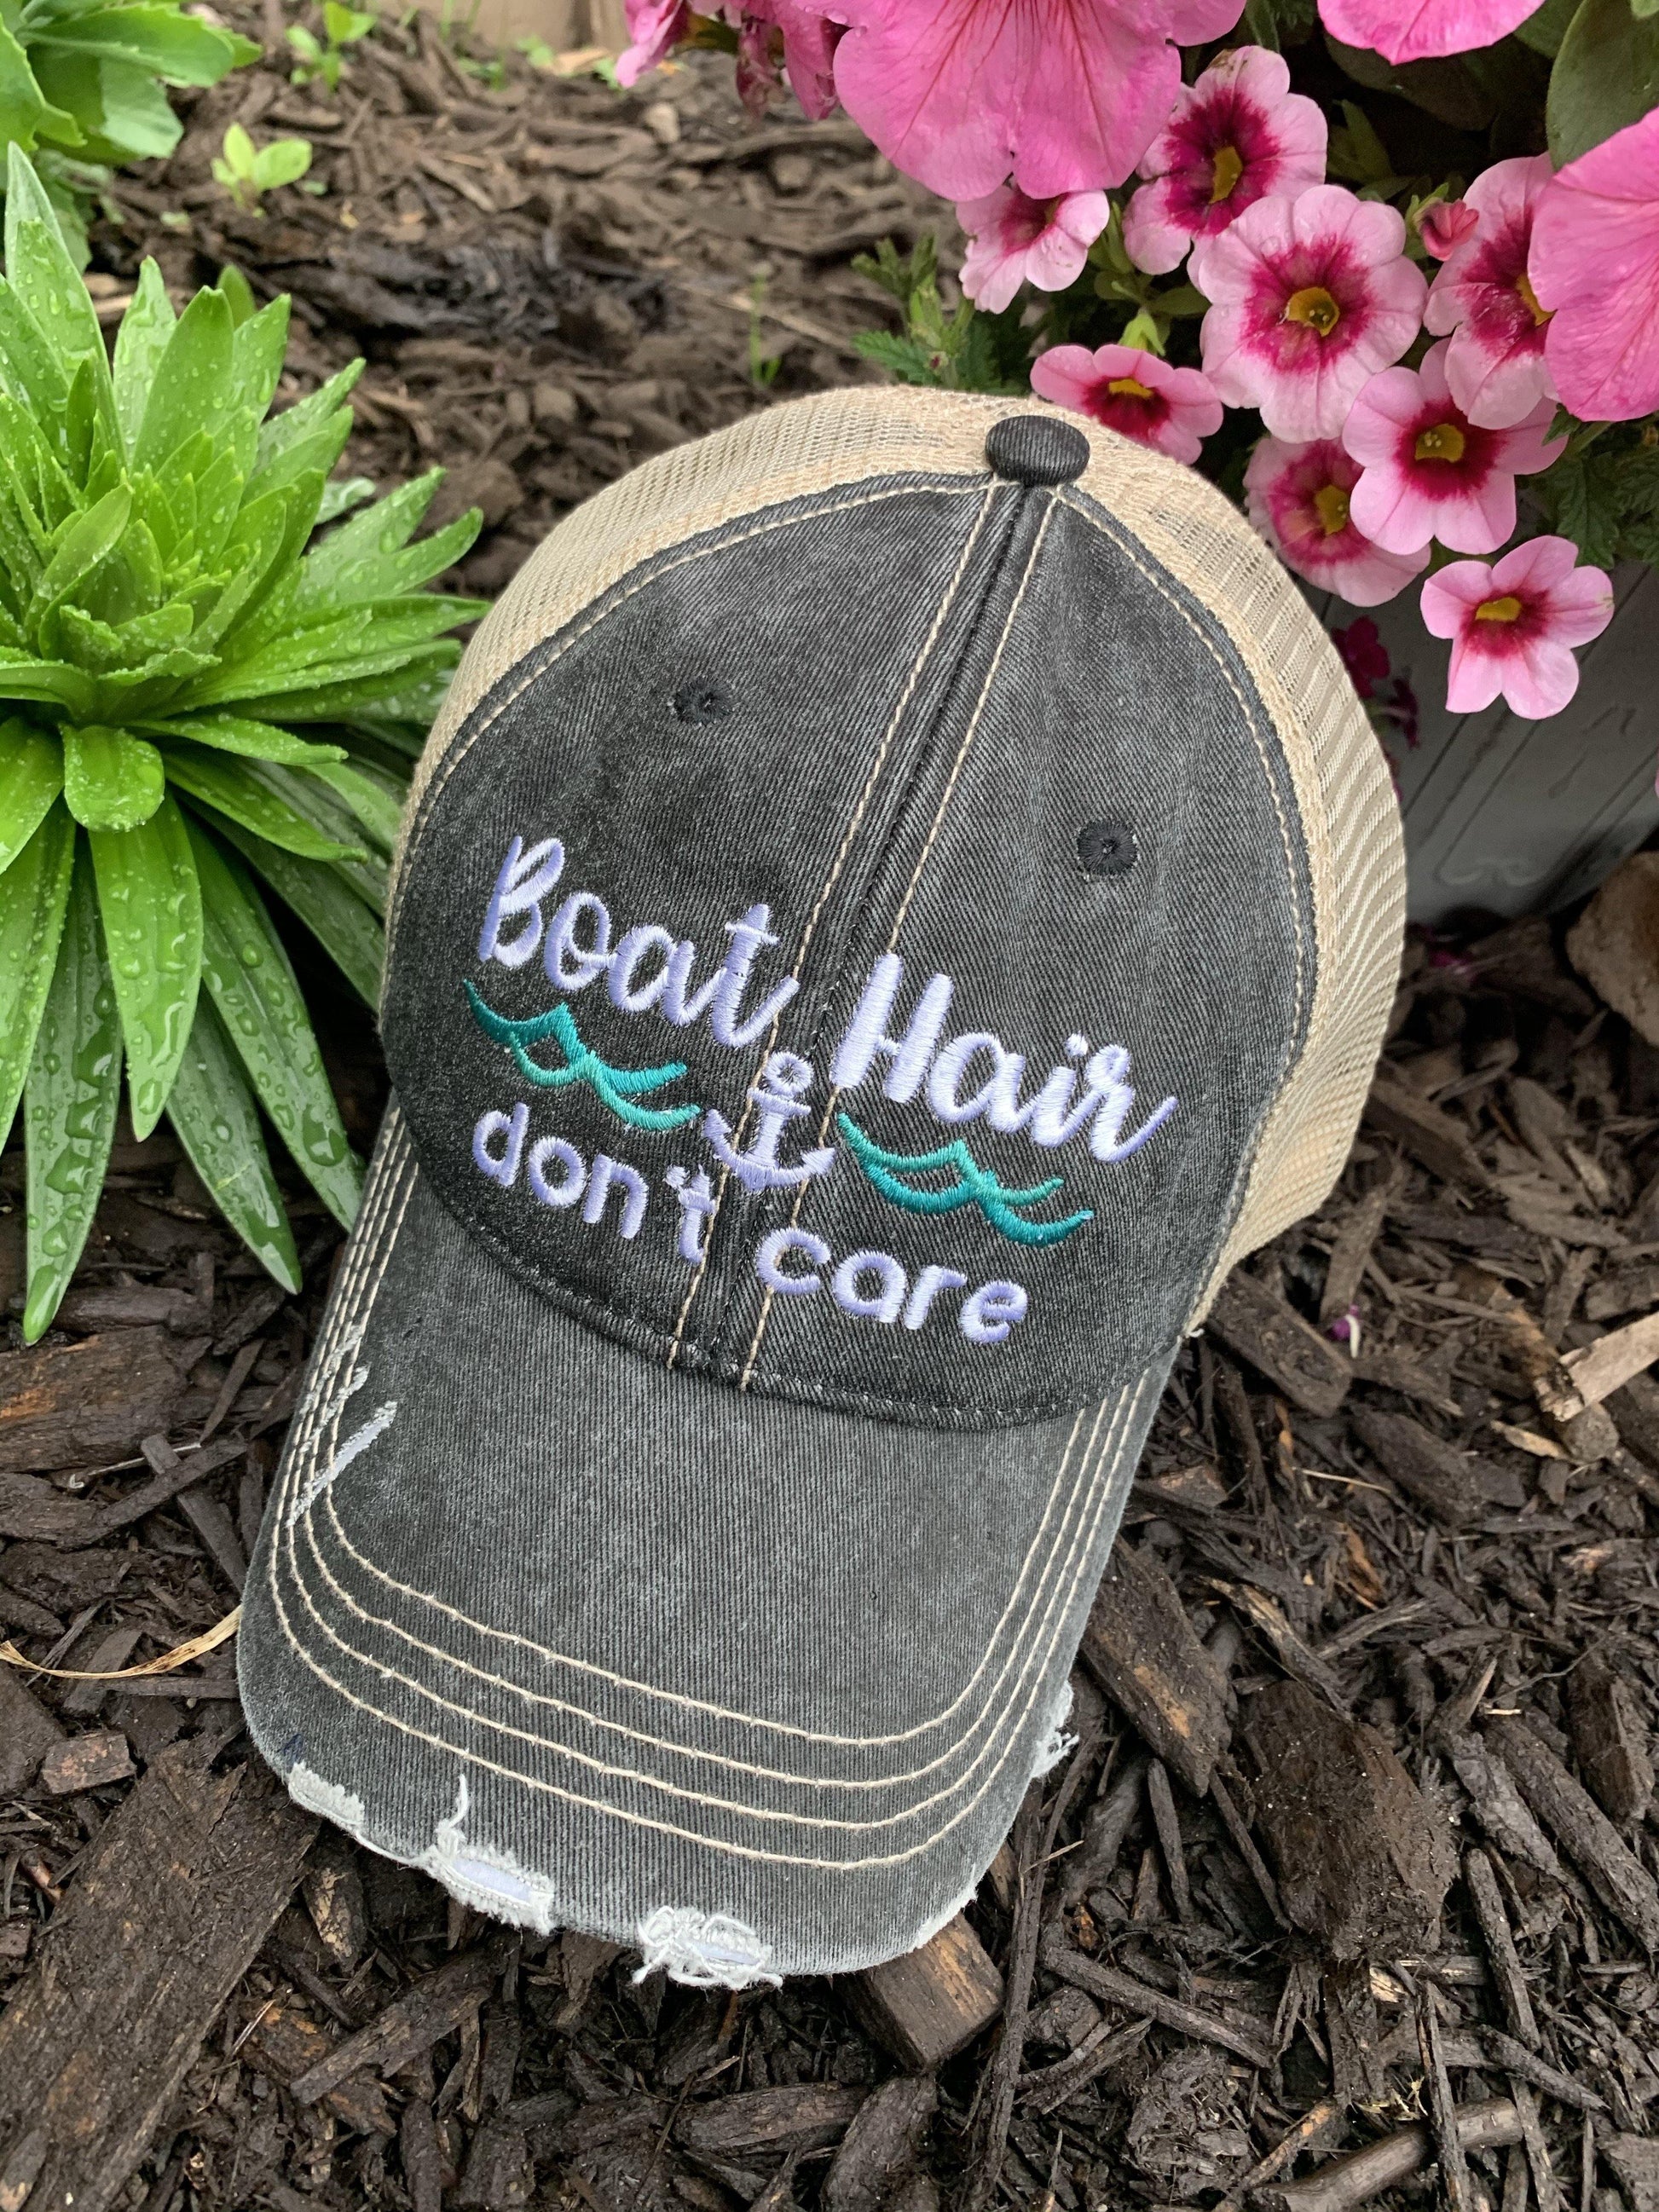 Boat Hats Boat Hair Dont Care Black Embroidered Trucker Cap Adjustable Mesh Back Hat. Boat Hair Don’t Care. Dark Gray Hat. Teal Waves, White Anchor. /